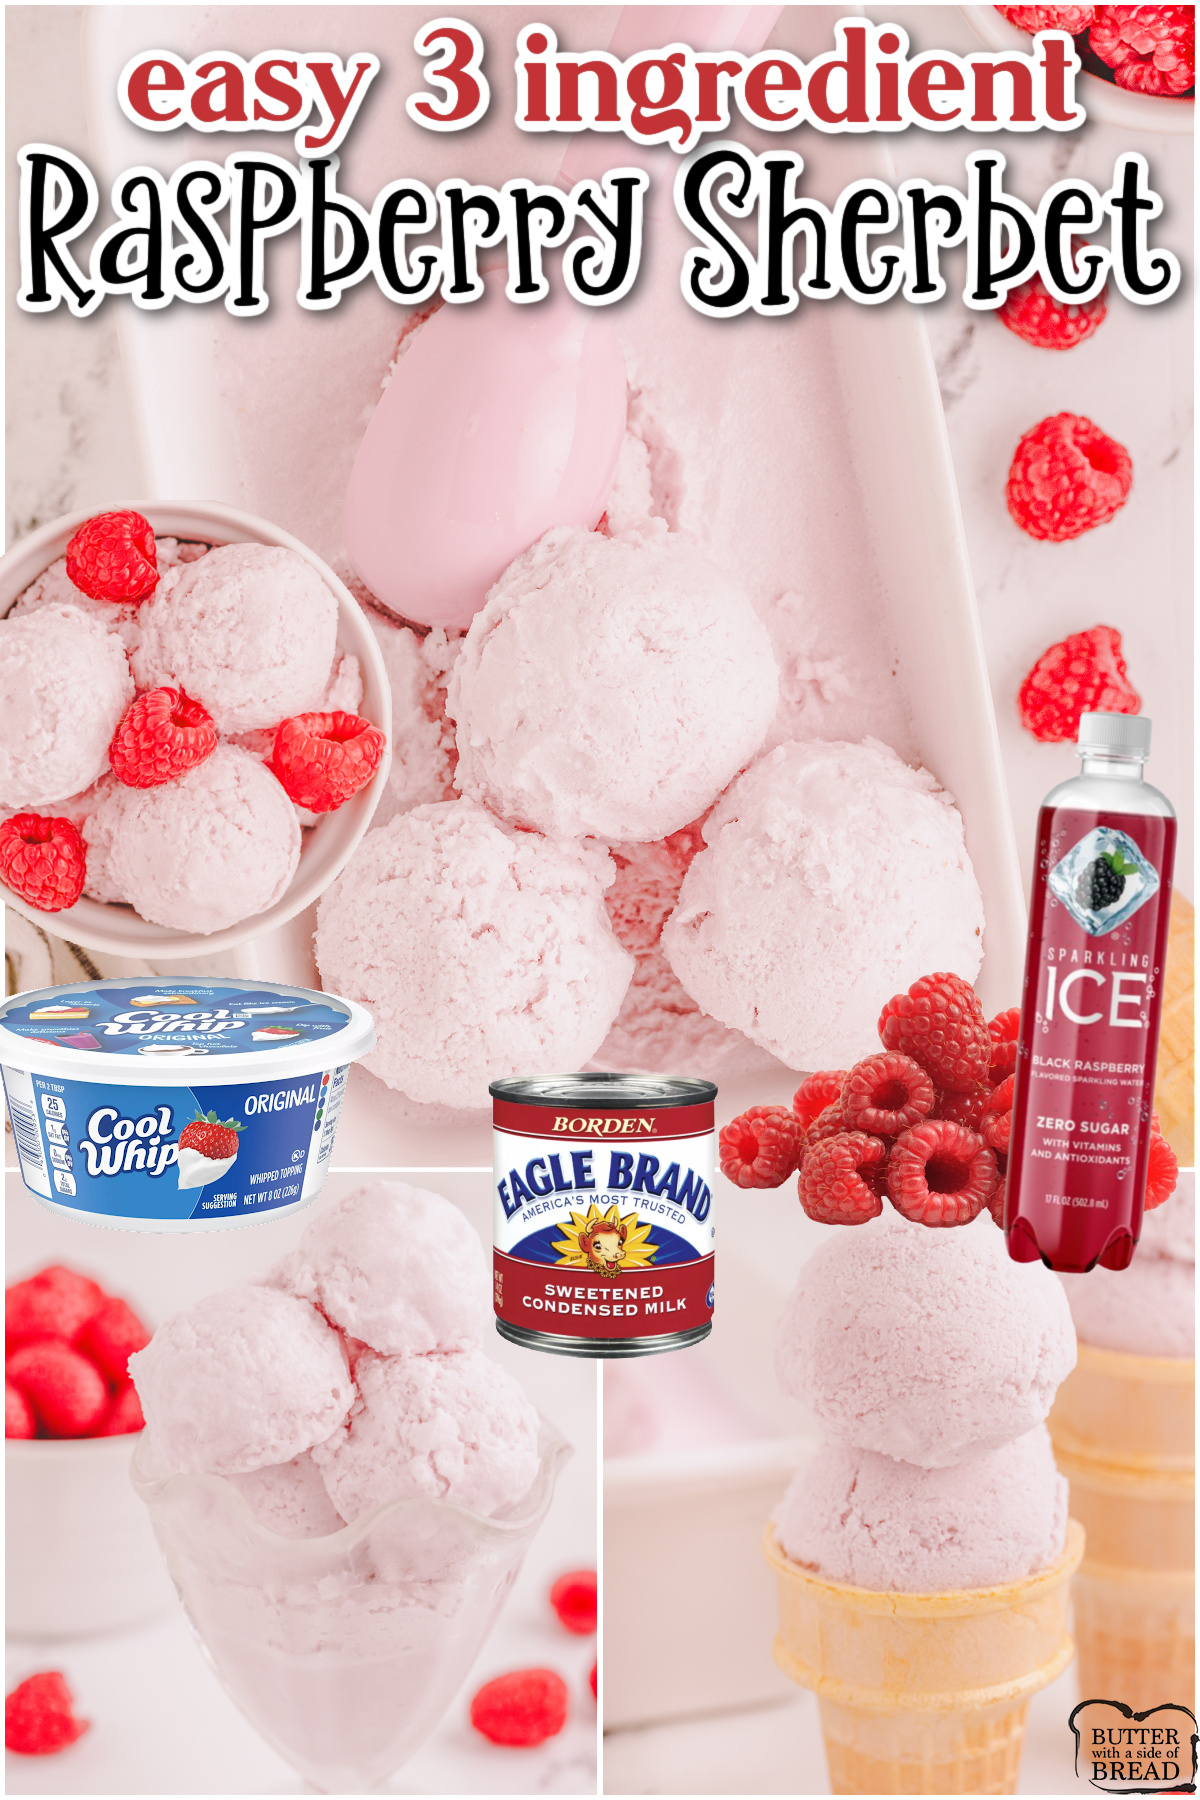 Fun & tasty Raspberry Sherbet recipe made with just 3 ingredients! Fantastic raspberry flavor in this creamy sherbet made with whipped topping, sweetened condensed milk & sparkling water!